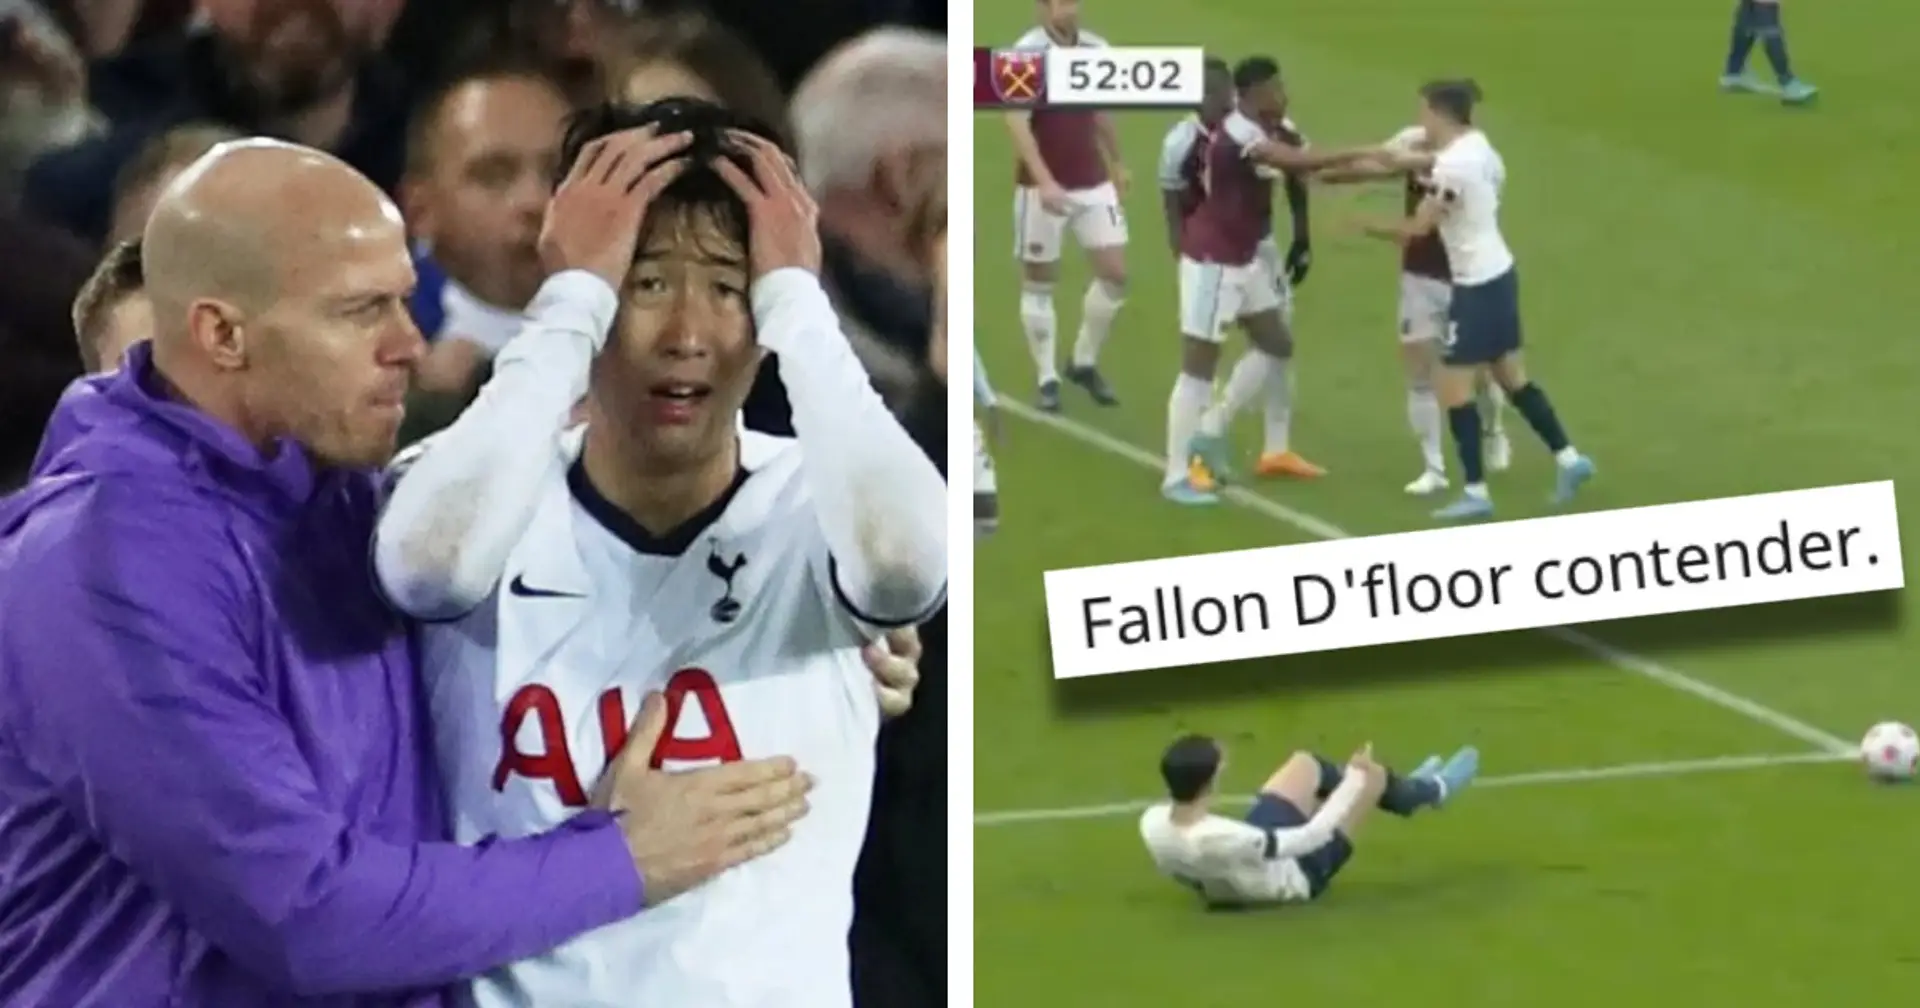 'Should be sent off for that': Fans react to Son's embarrassing dive after ball hits his foot